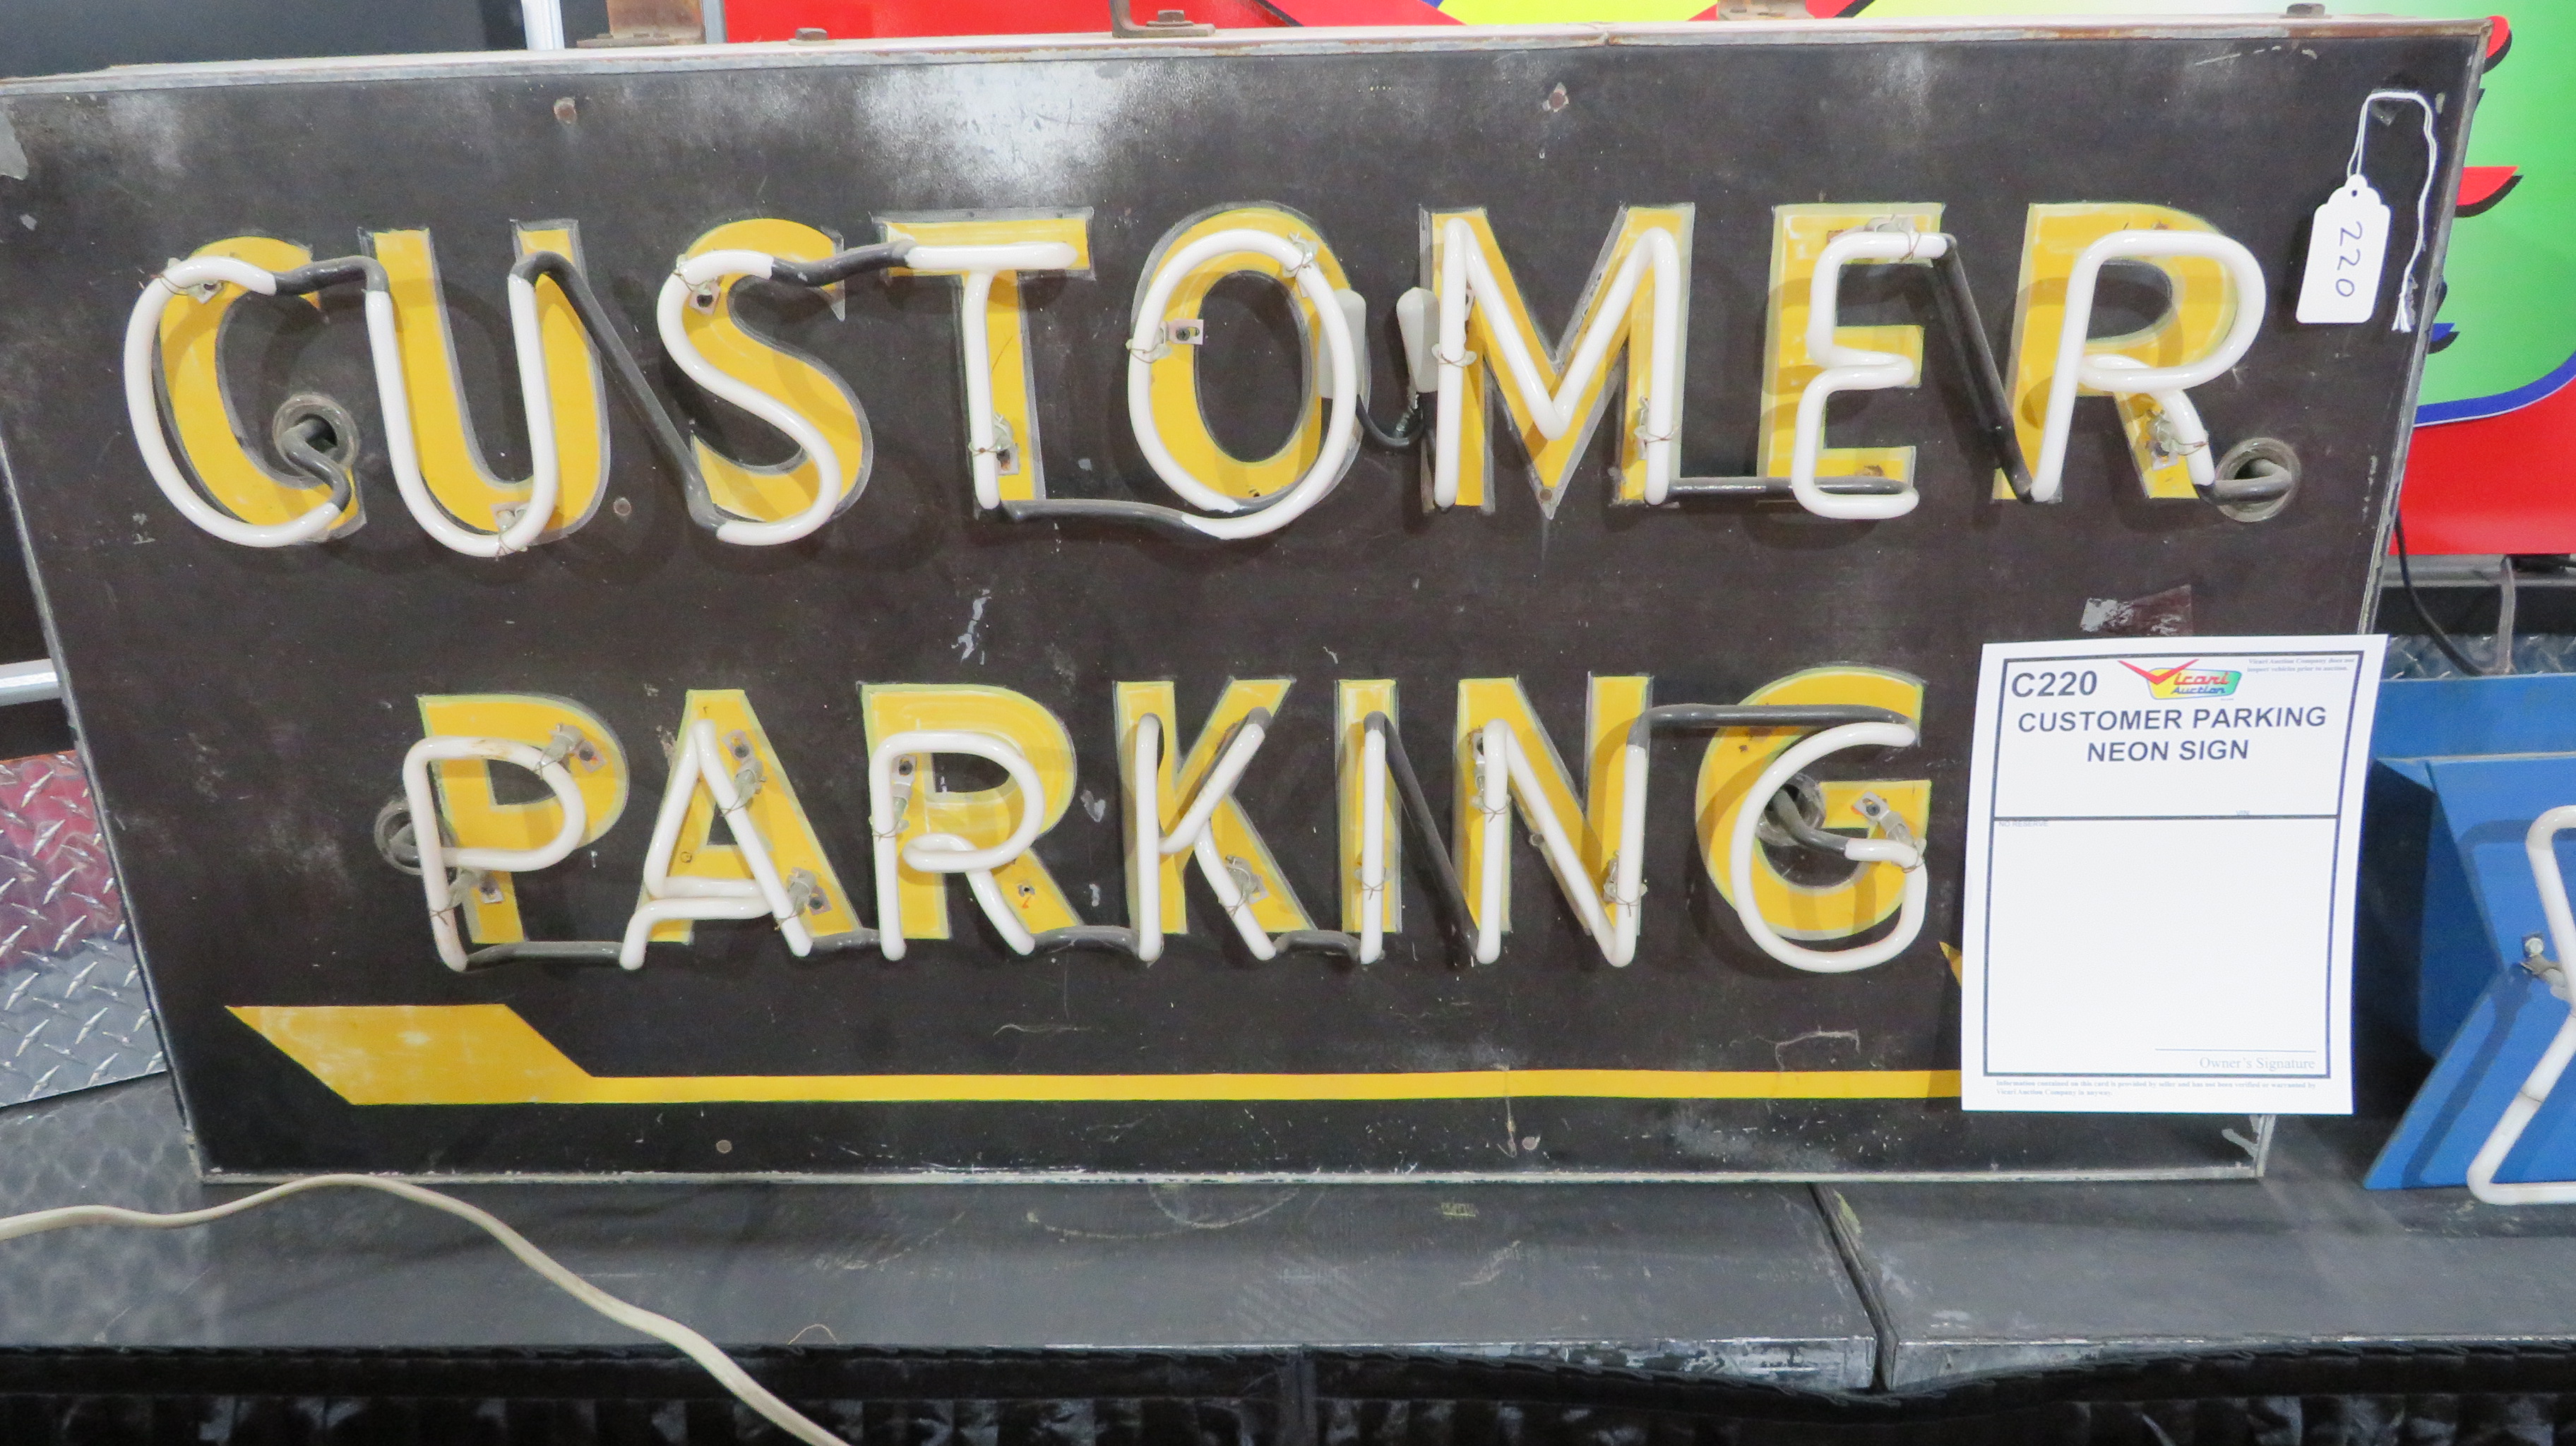 0th Image of a N/A CUSTOMER PARKING NEON SIGN